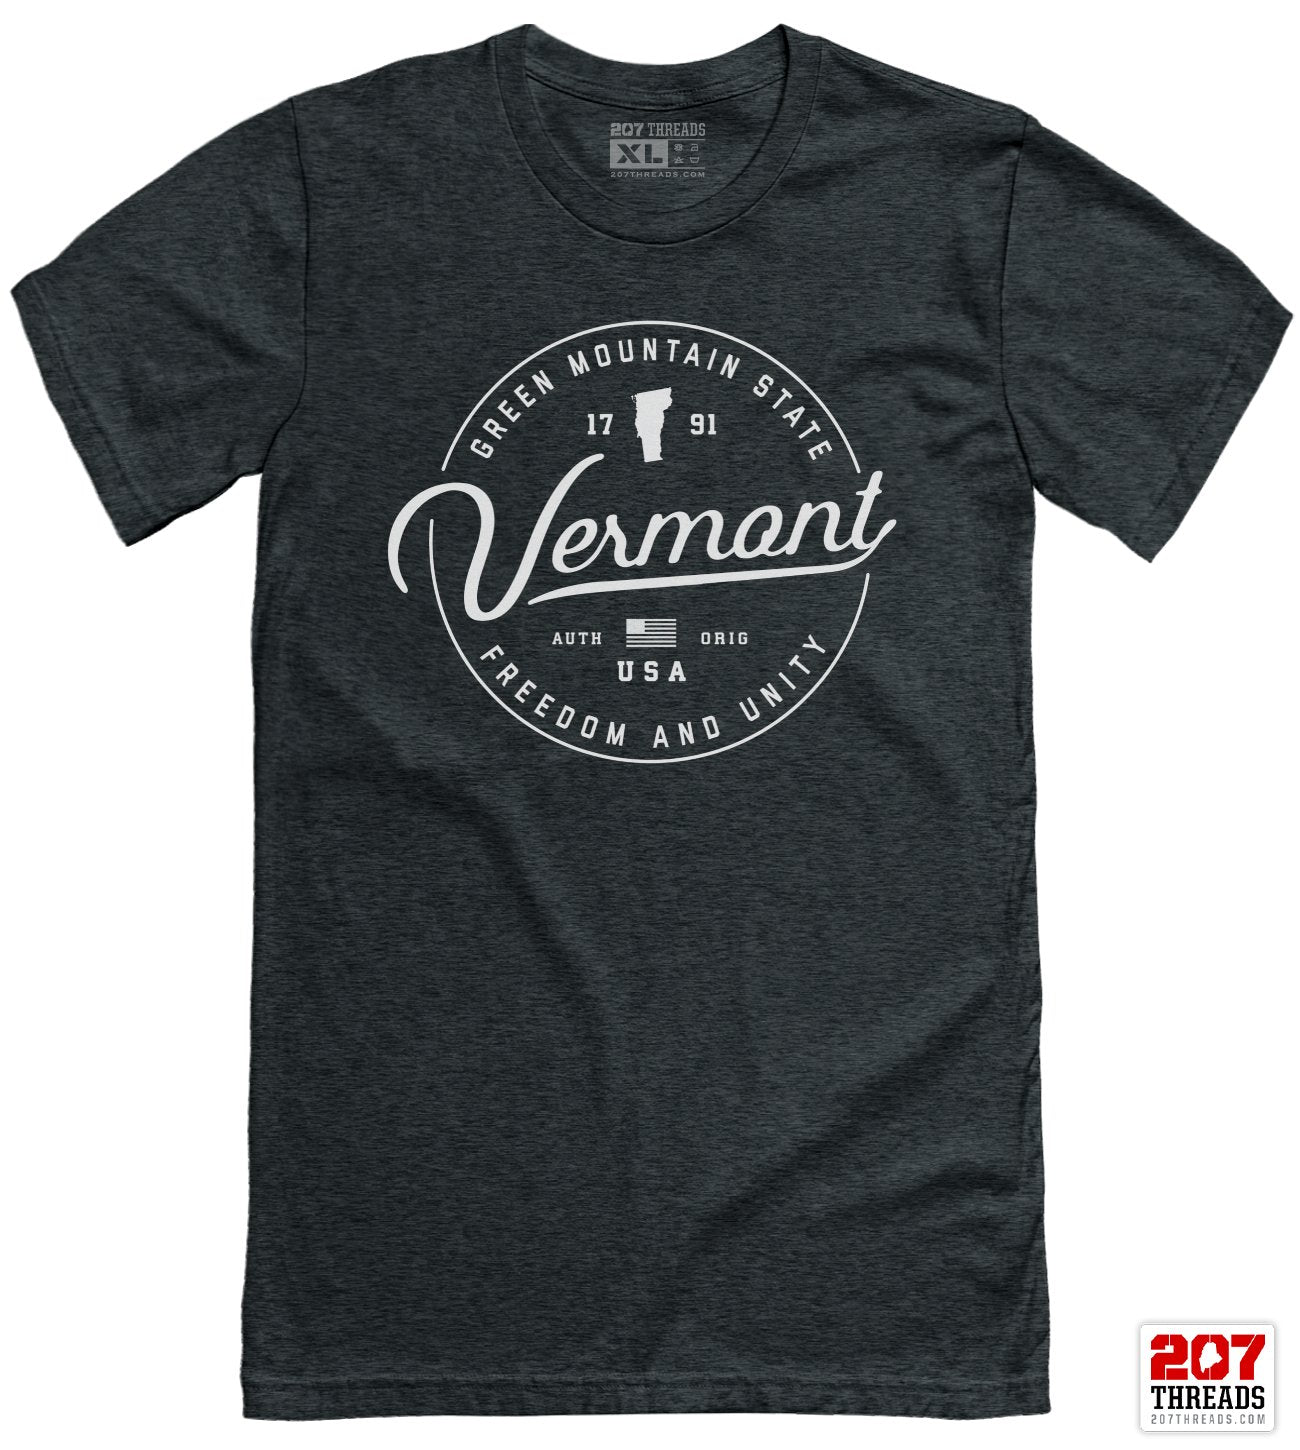 State of Vermont T-Shirt - Soft Vermont Vacation Tee